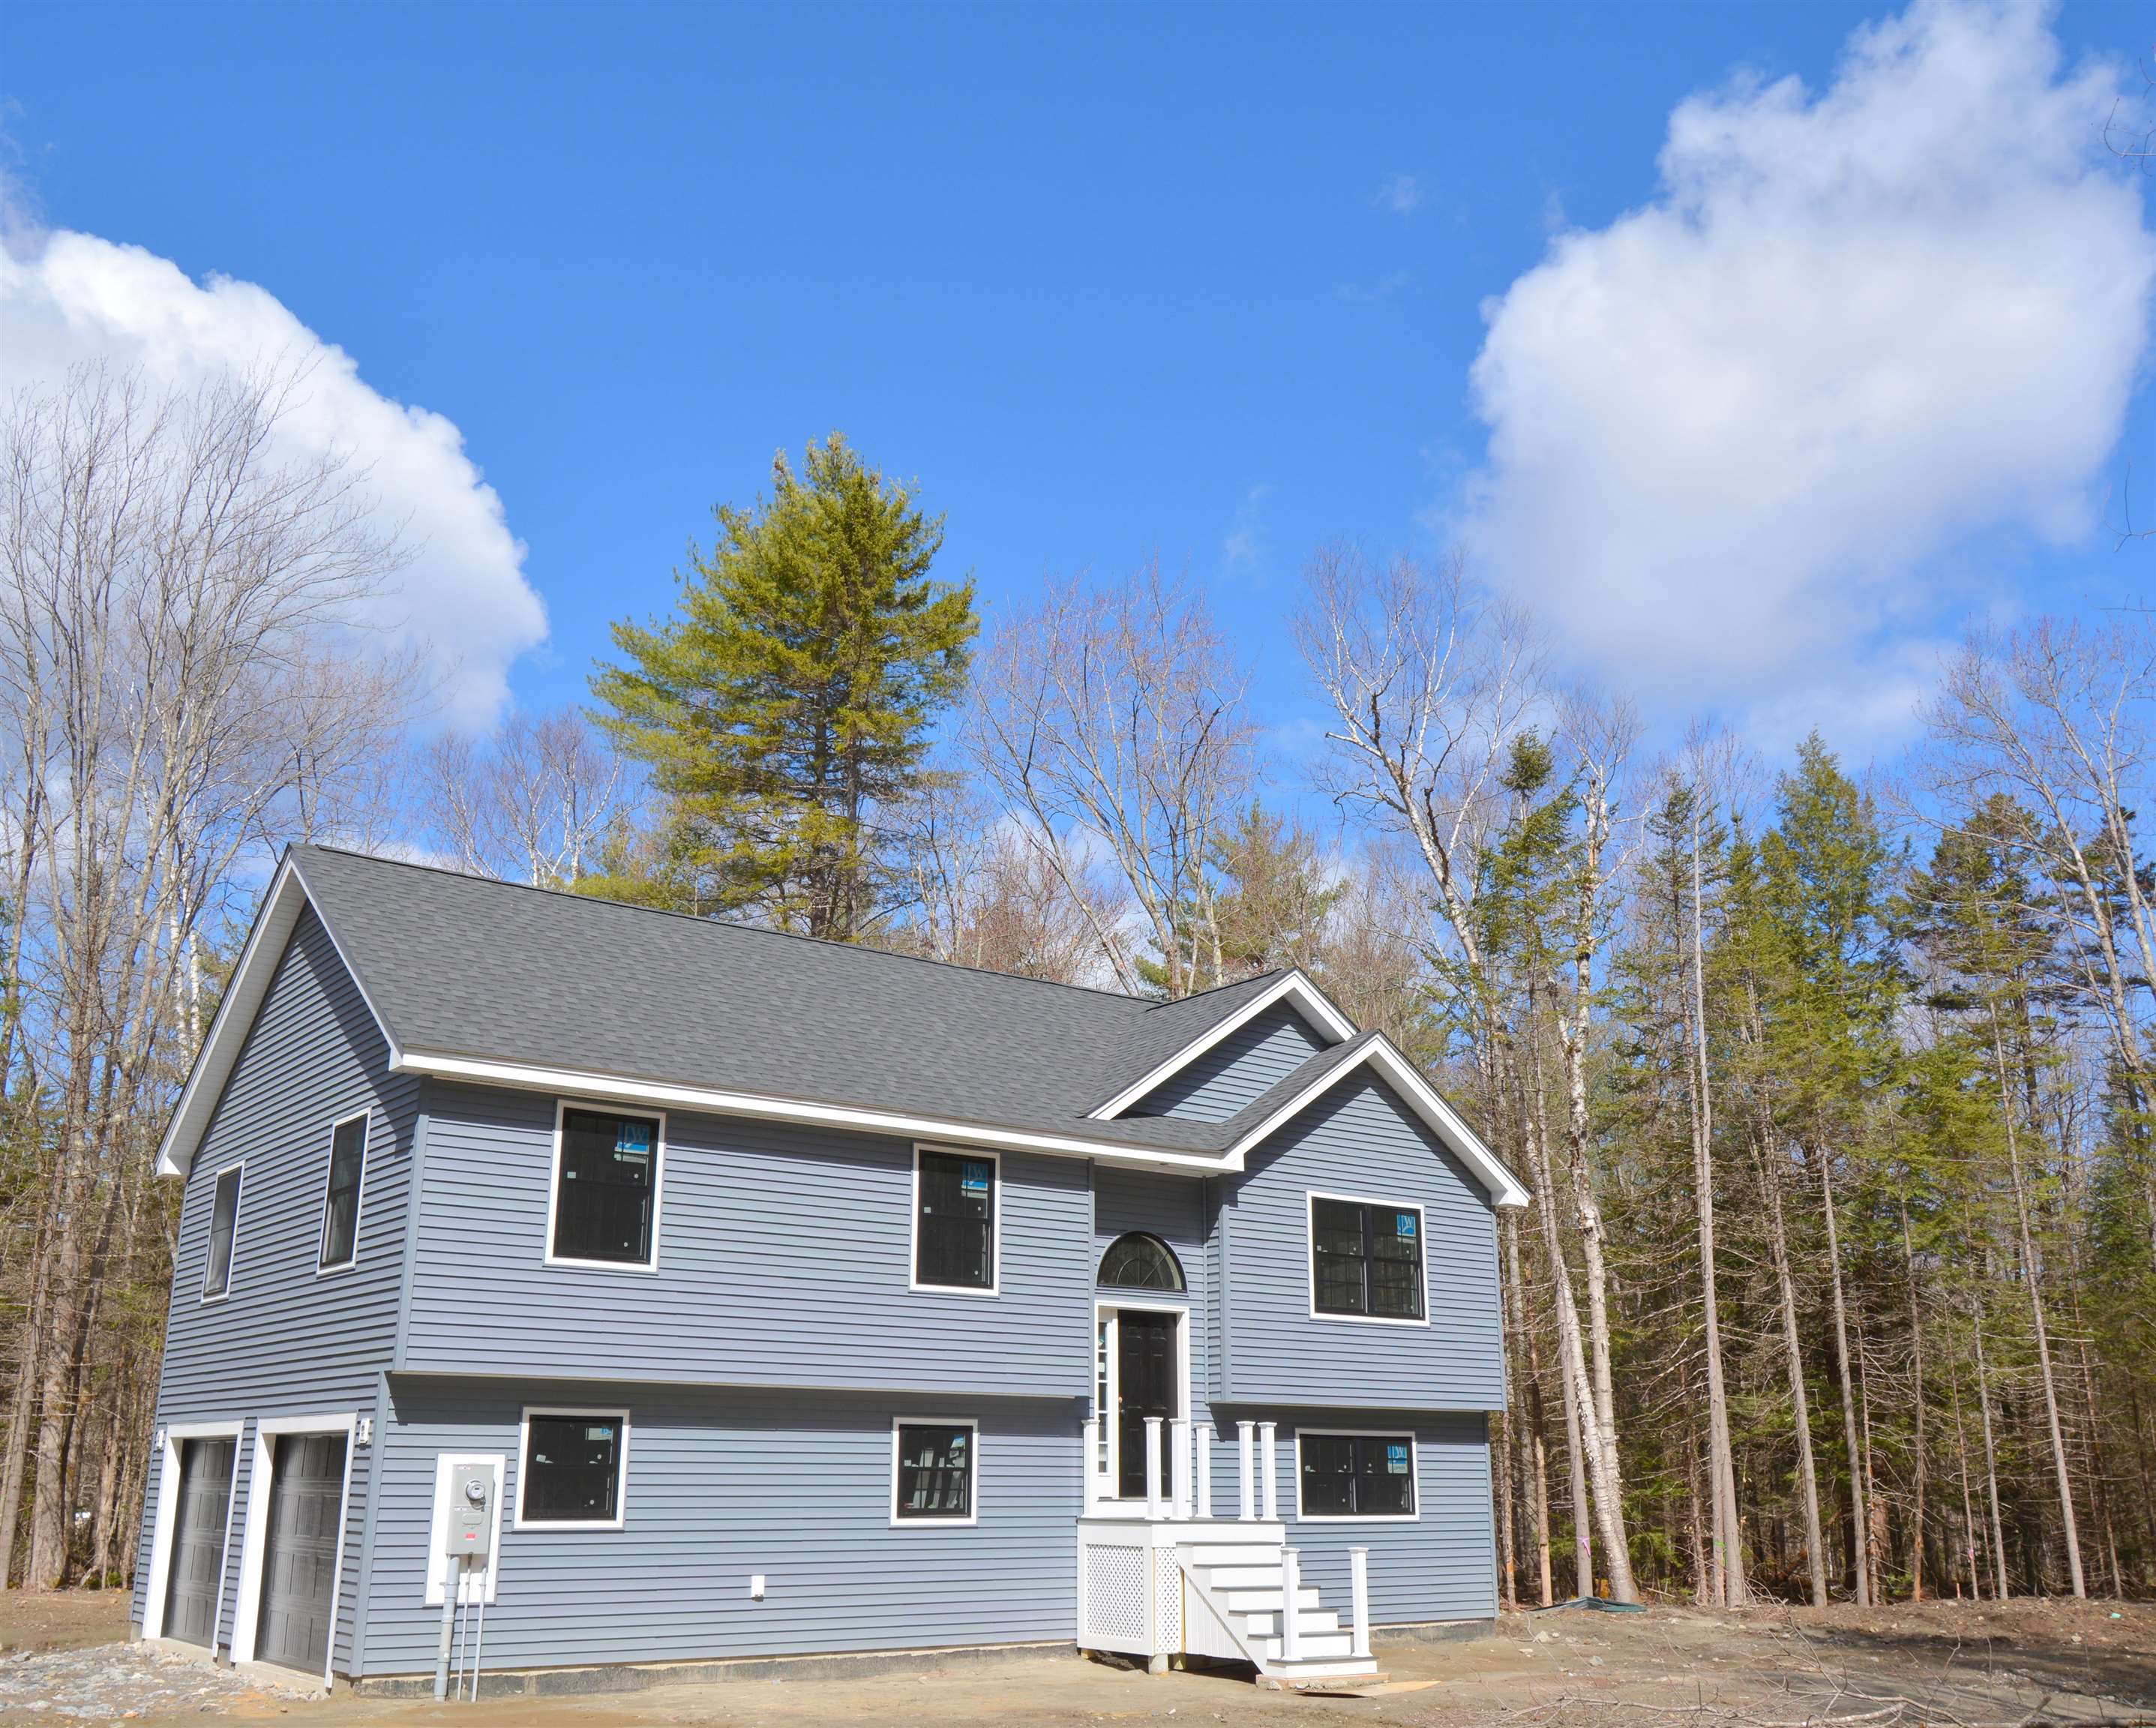 VILLAGE OF EASTMAN IN TOWN OF GRANTHAM NH Homes for sale